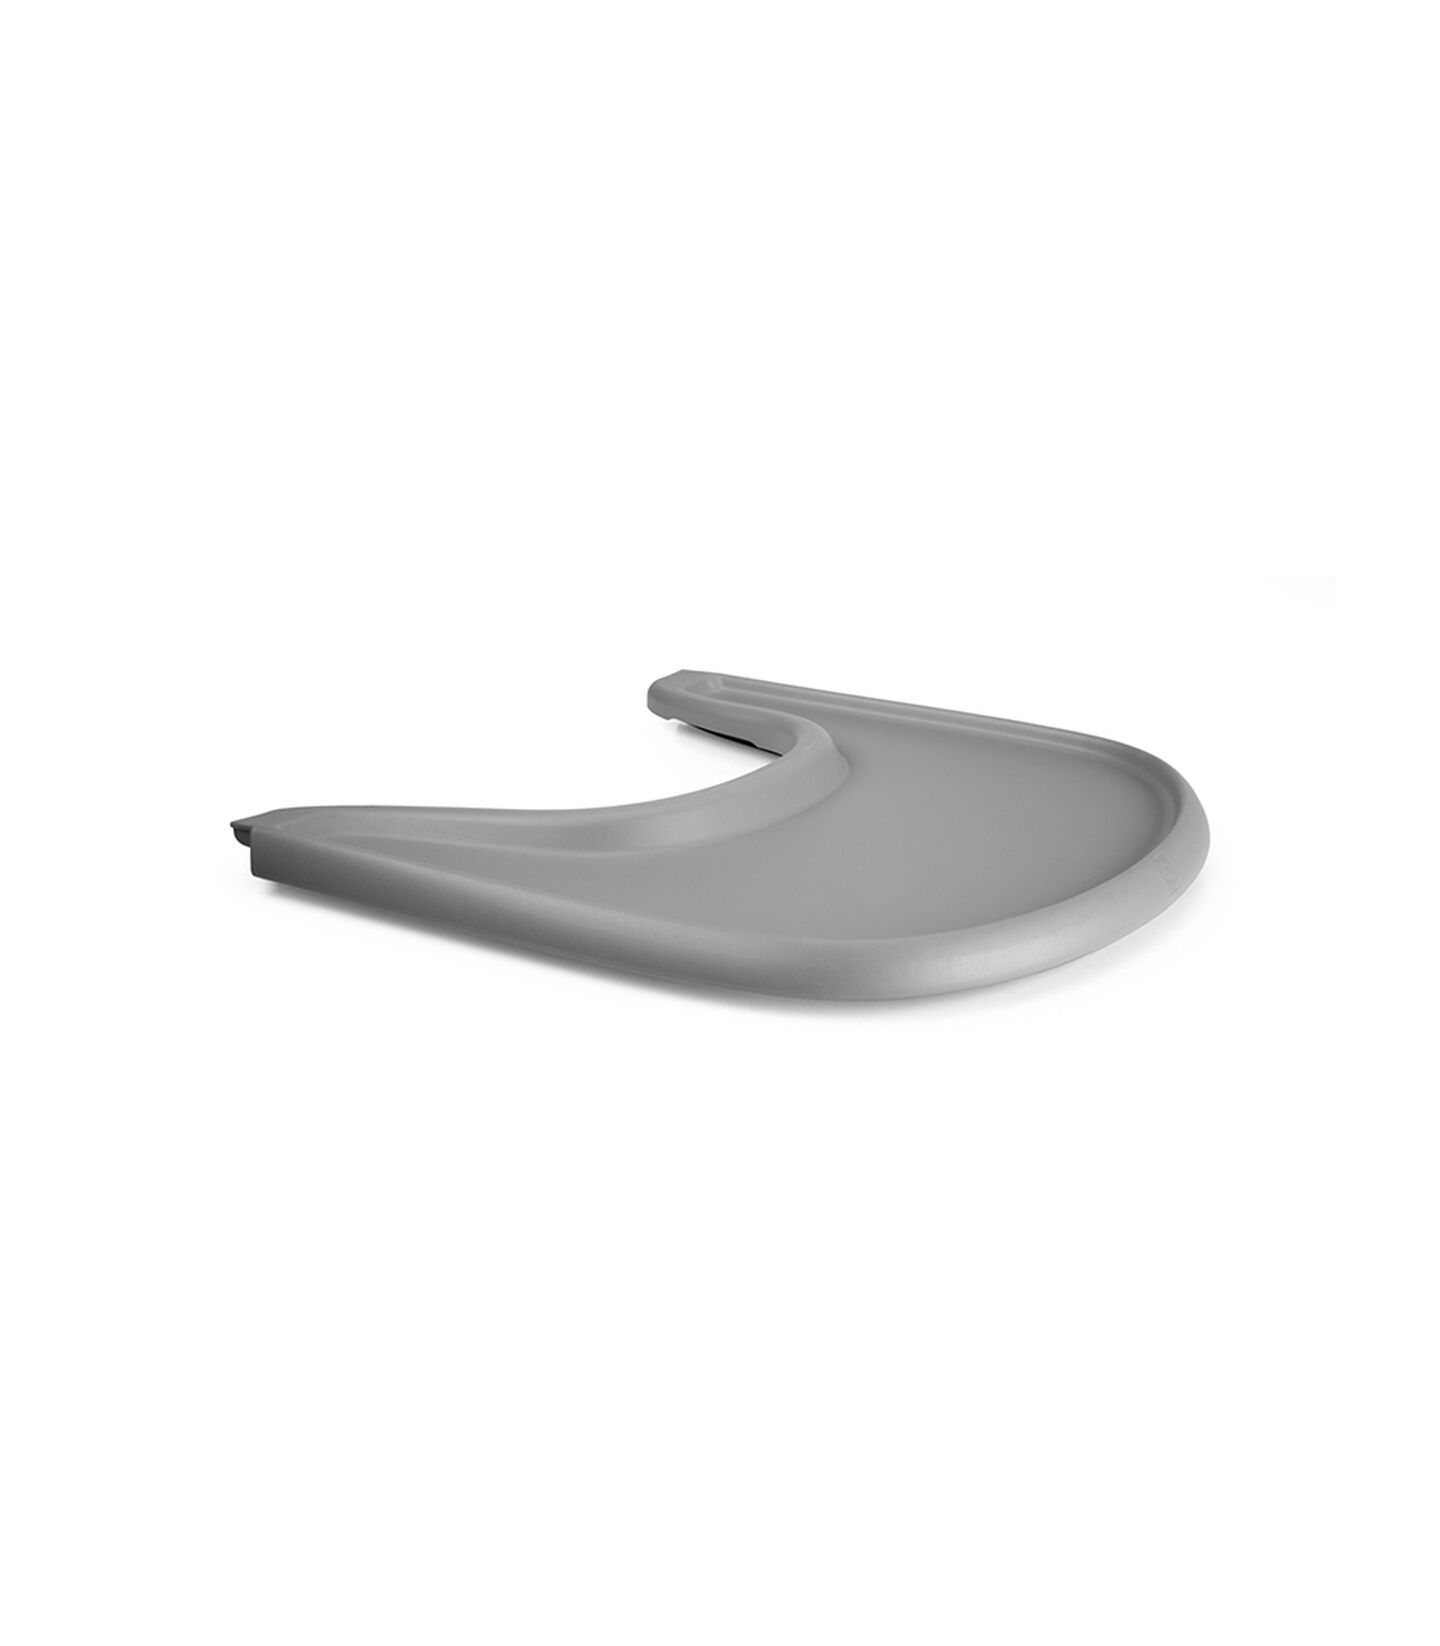 Stokke® Tray Storm Grey, Storm Grey, mainview view 1